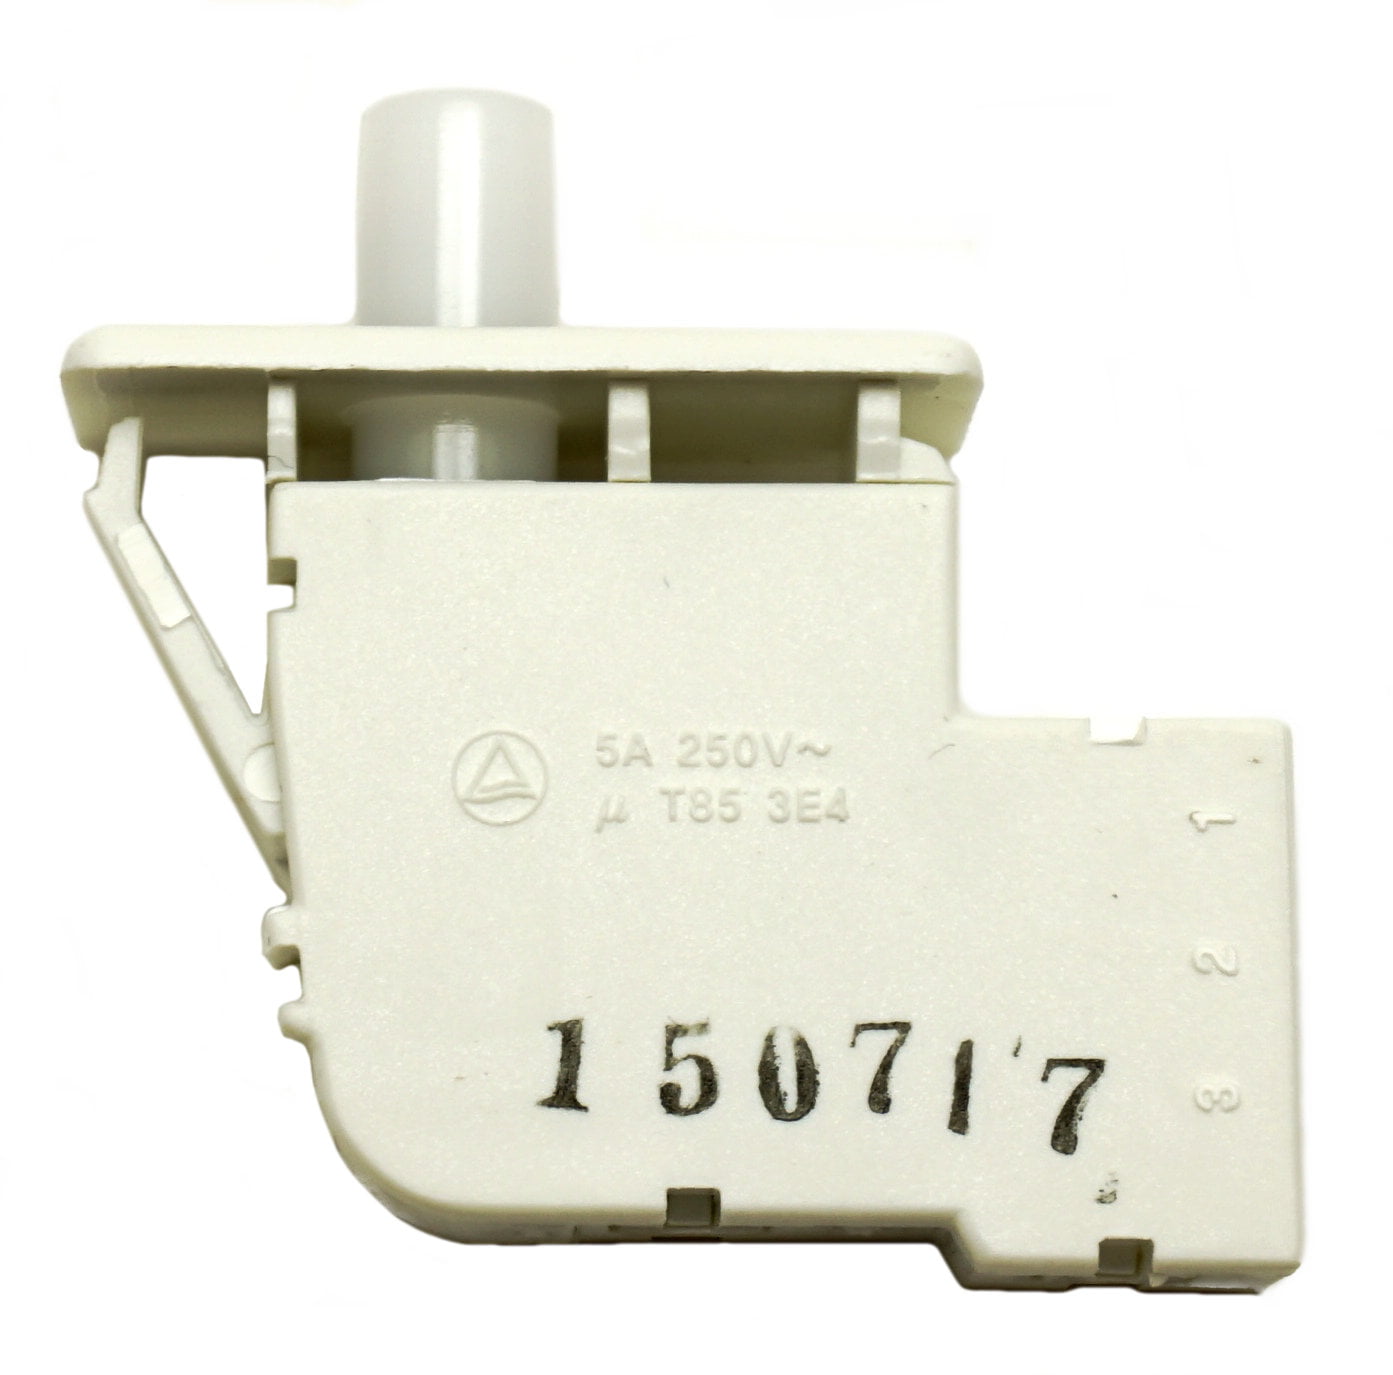 Details about   6601EL3001A White Dryer Door Switch for LG AP4441527 PS3529308 